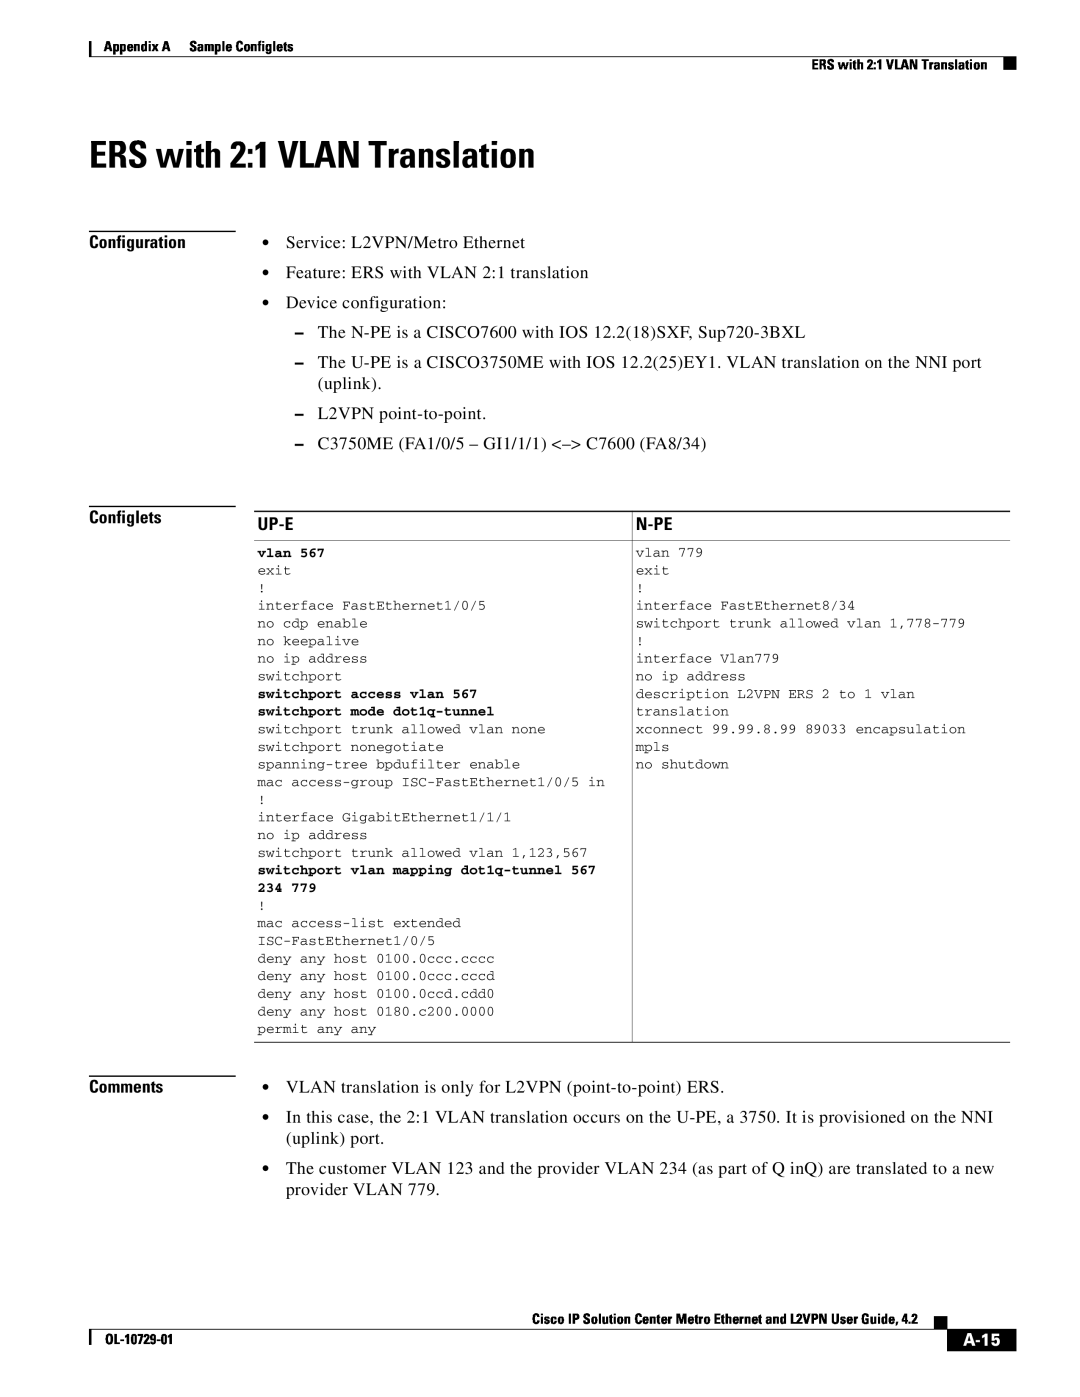 Cisco Systems OL-10729-01 appendix ERS with 21 VLAN Translation, A-15, Configuration Configlets, Up-E, N-Pe, Comments 